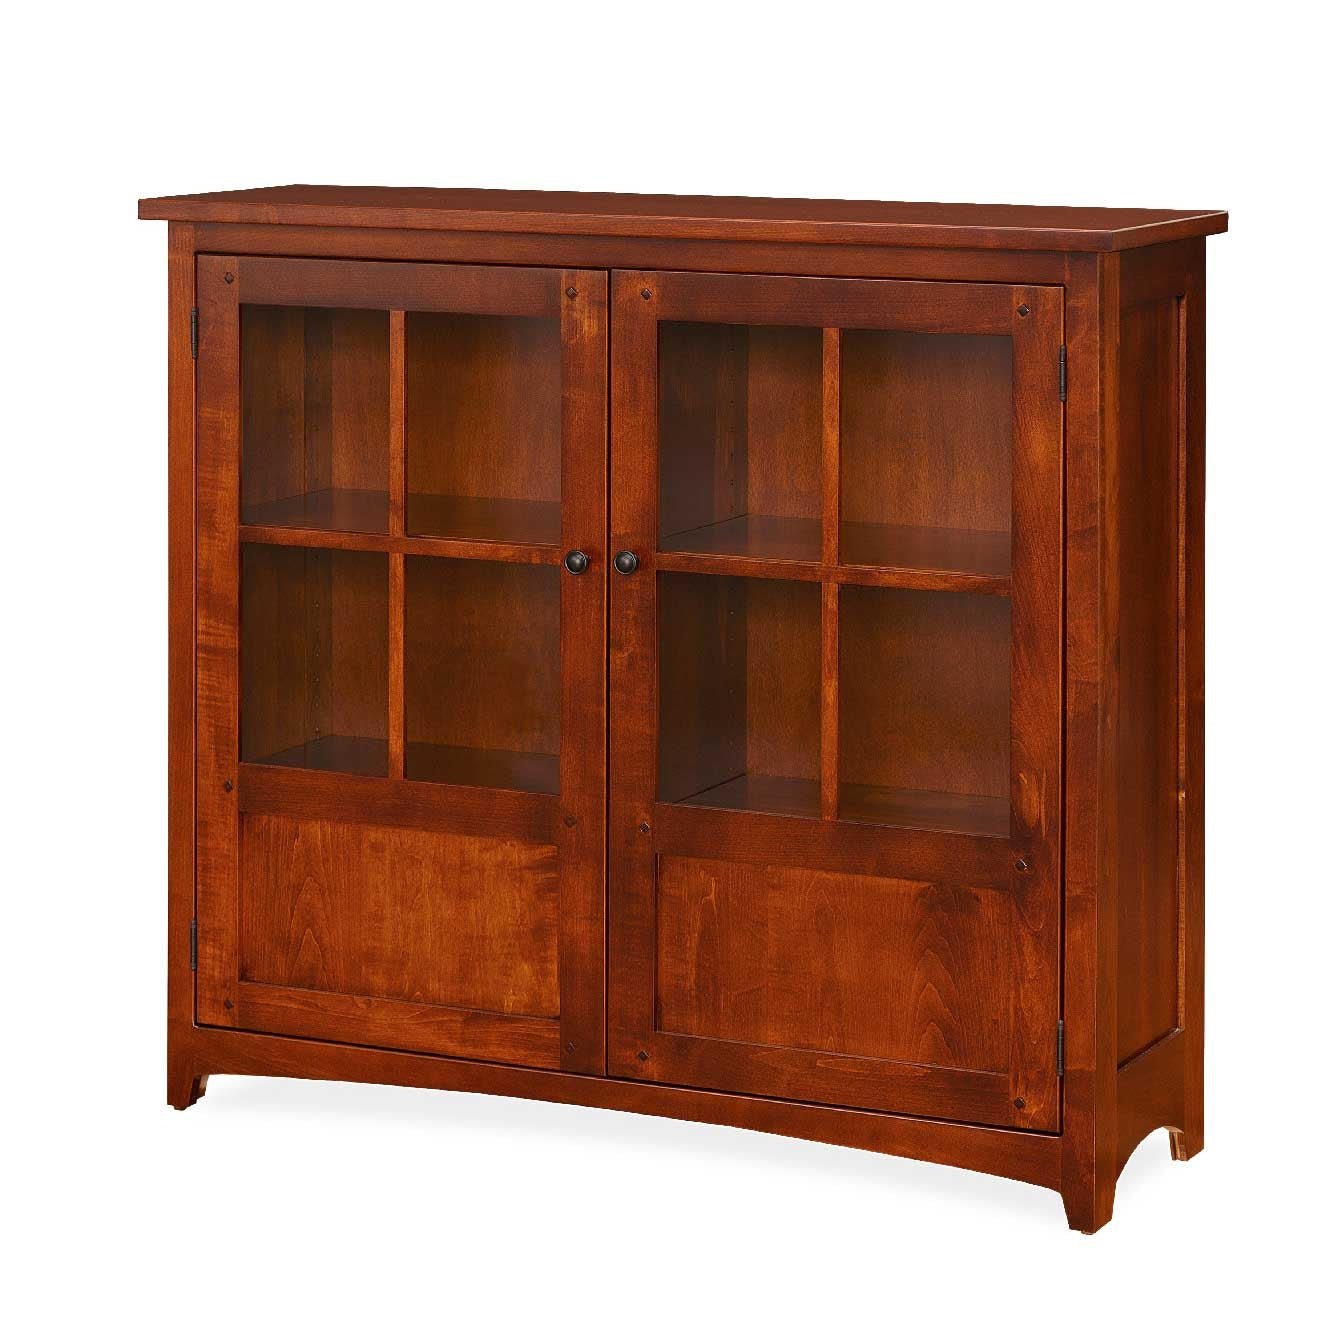 Belmont Bookcase with doors - snyders.furniture